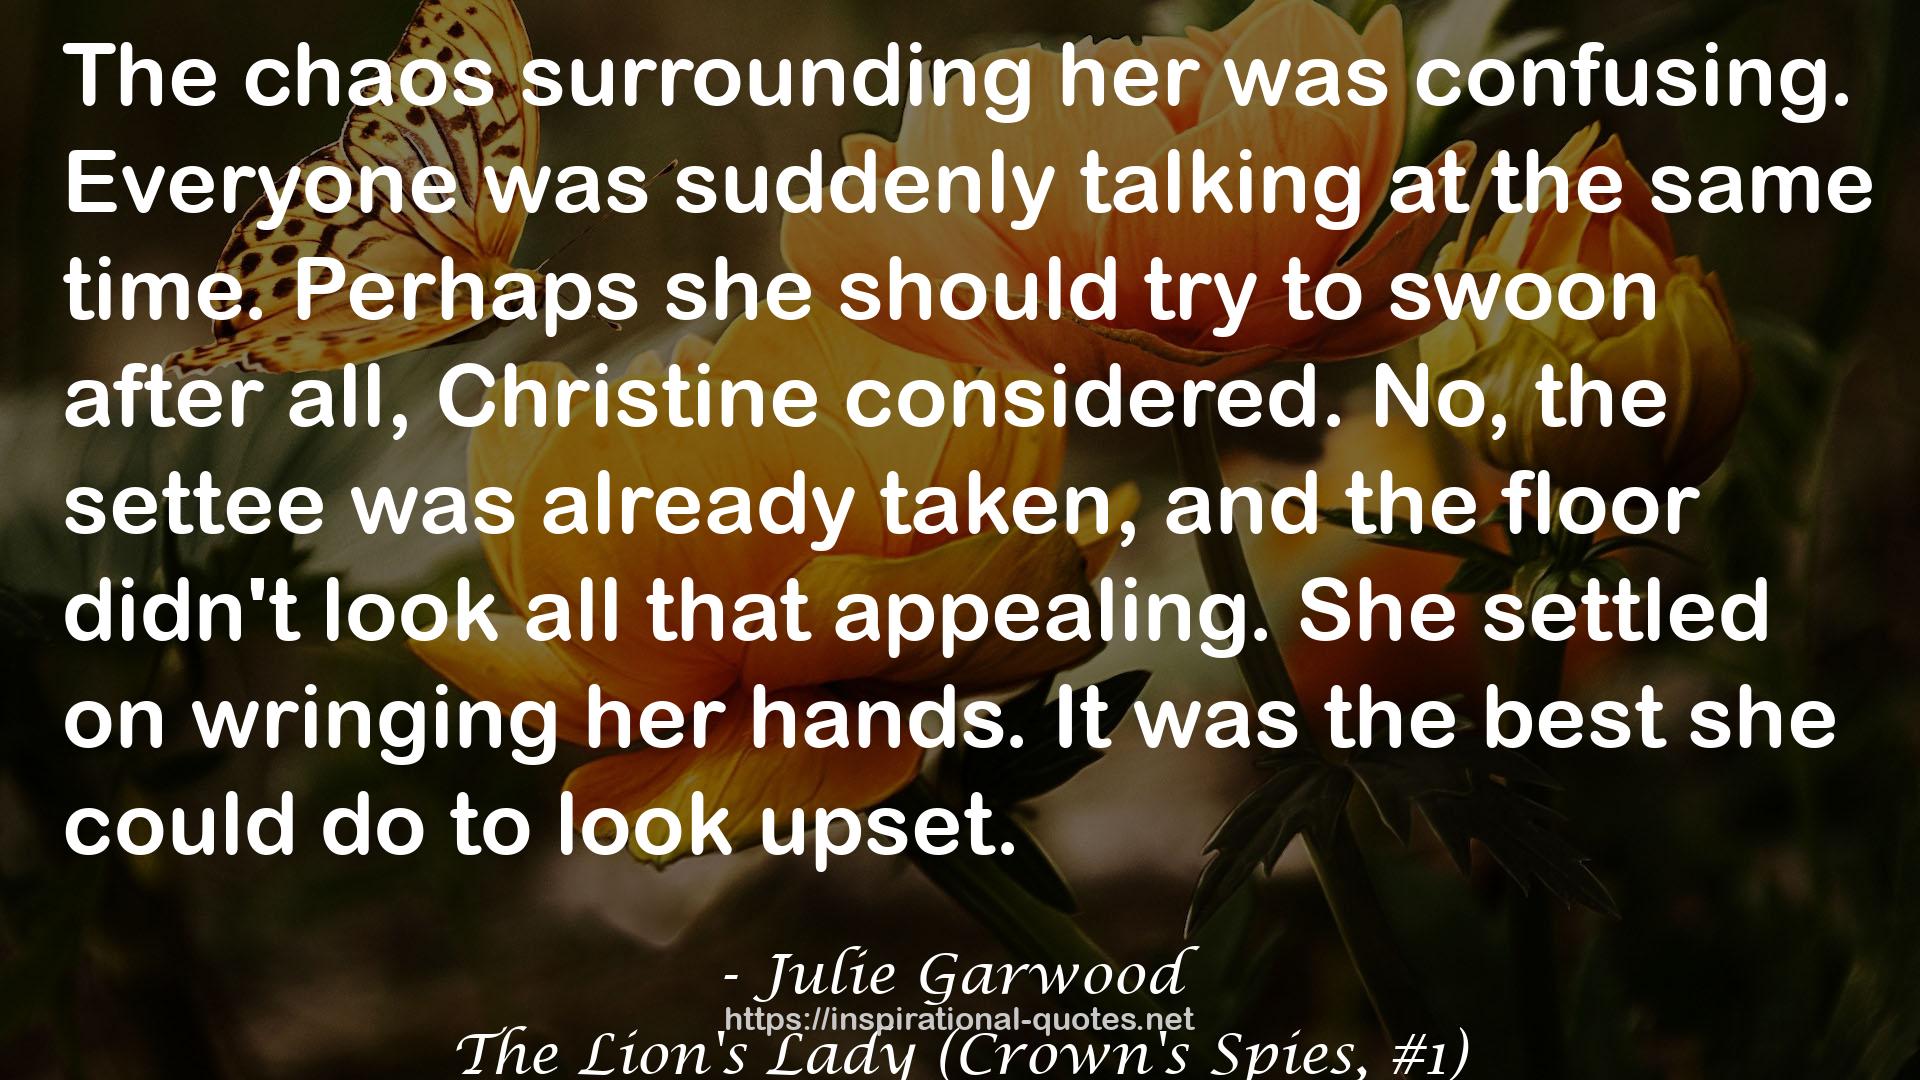 The Lion's Lady (Crown's Spies, #1) QUOTES